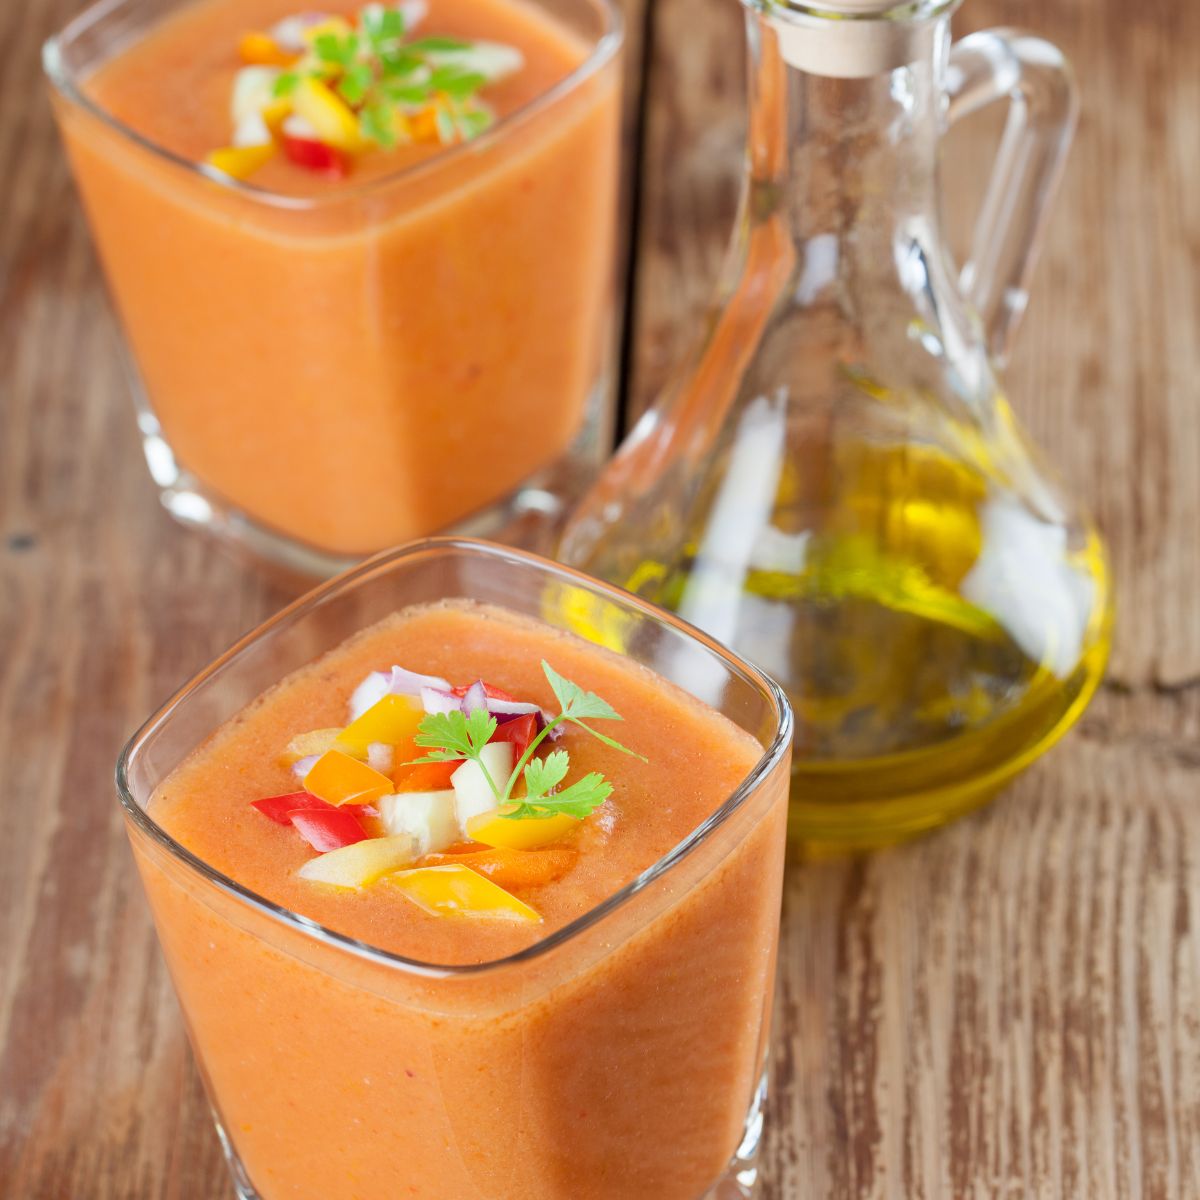 Two small glasses of gazpacho shooters with a carafe of olive oil on the side.